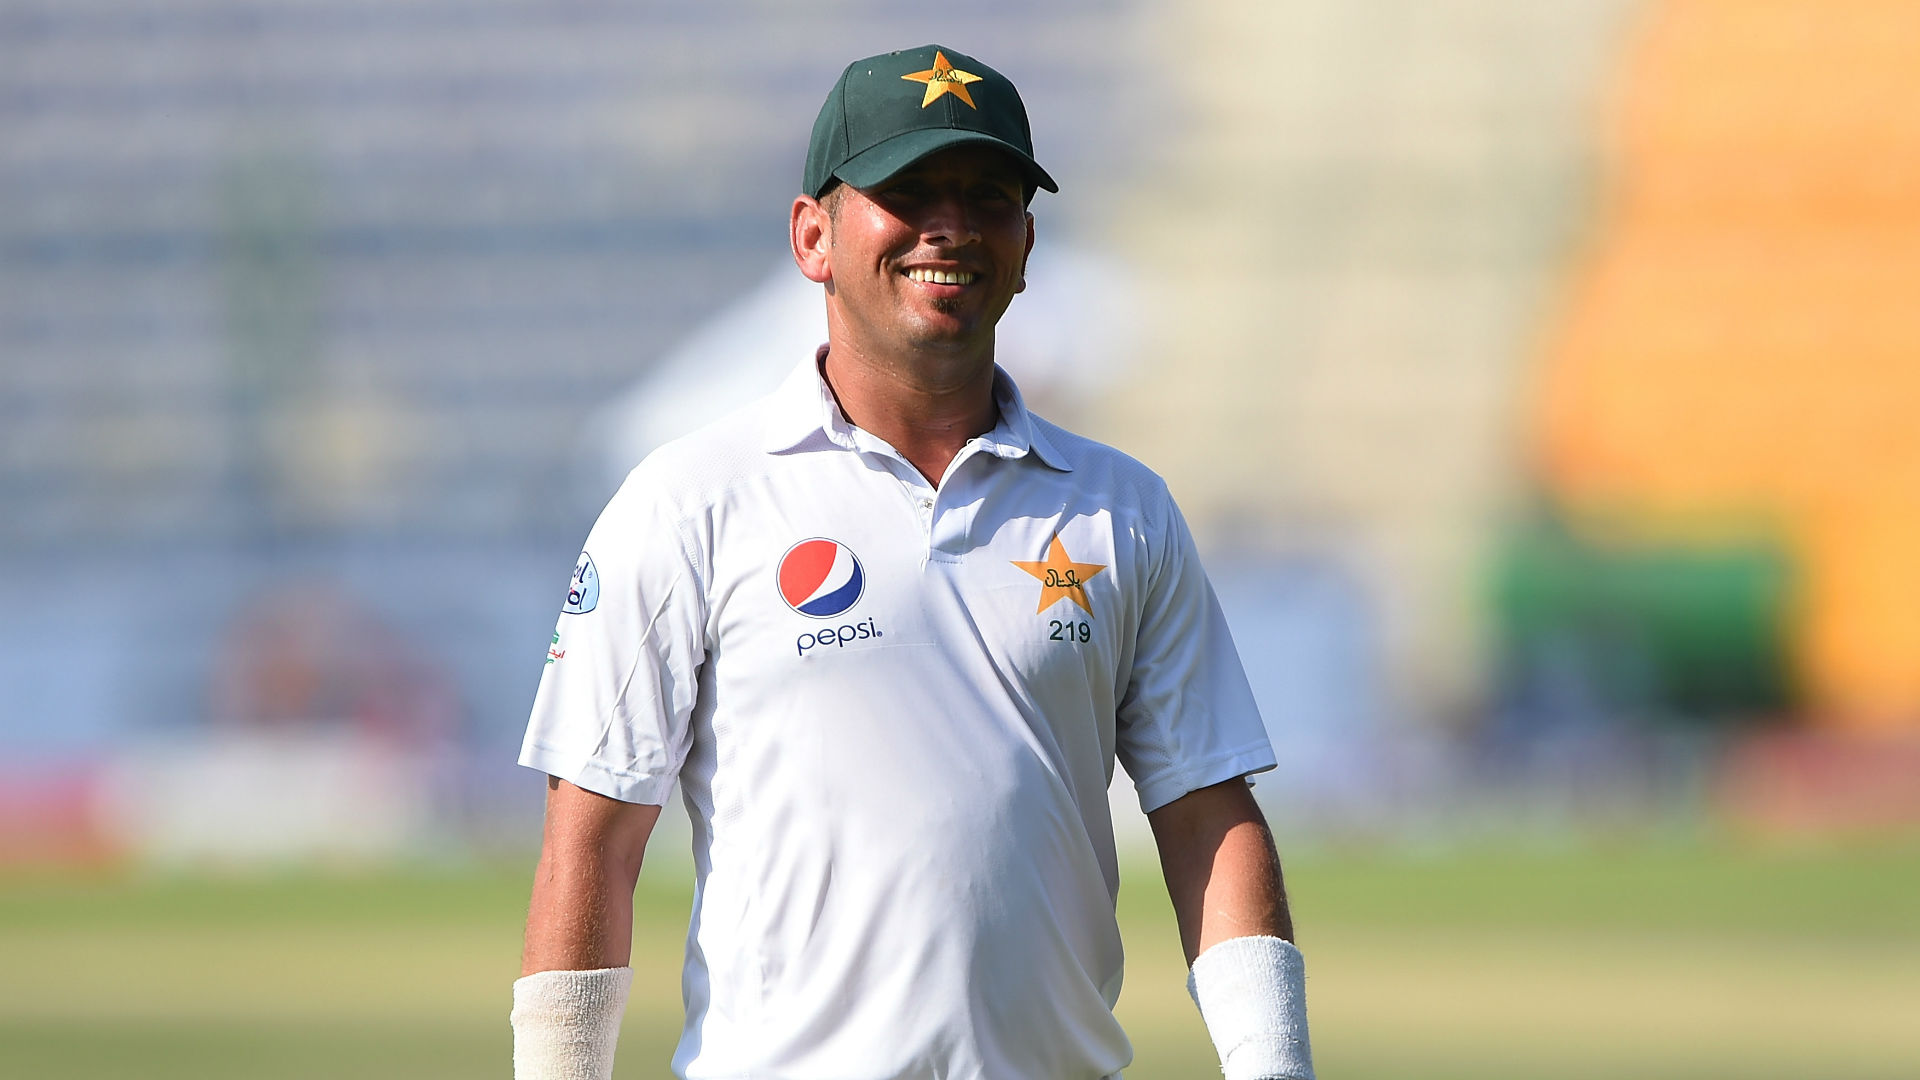 Yasir Shah was sent for a scan in Johannesburg after missing the final Test against South Africa with a knee injury.